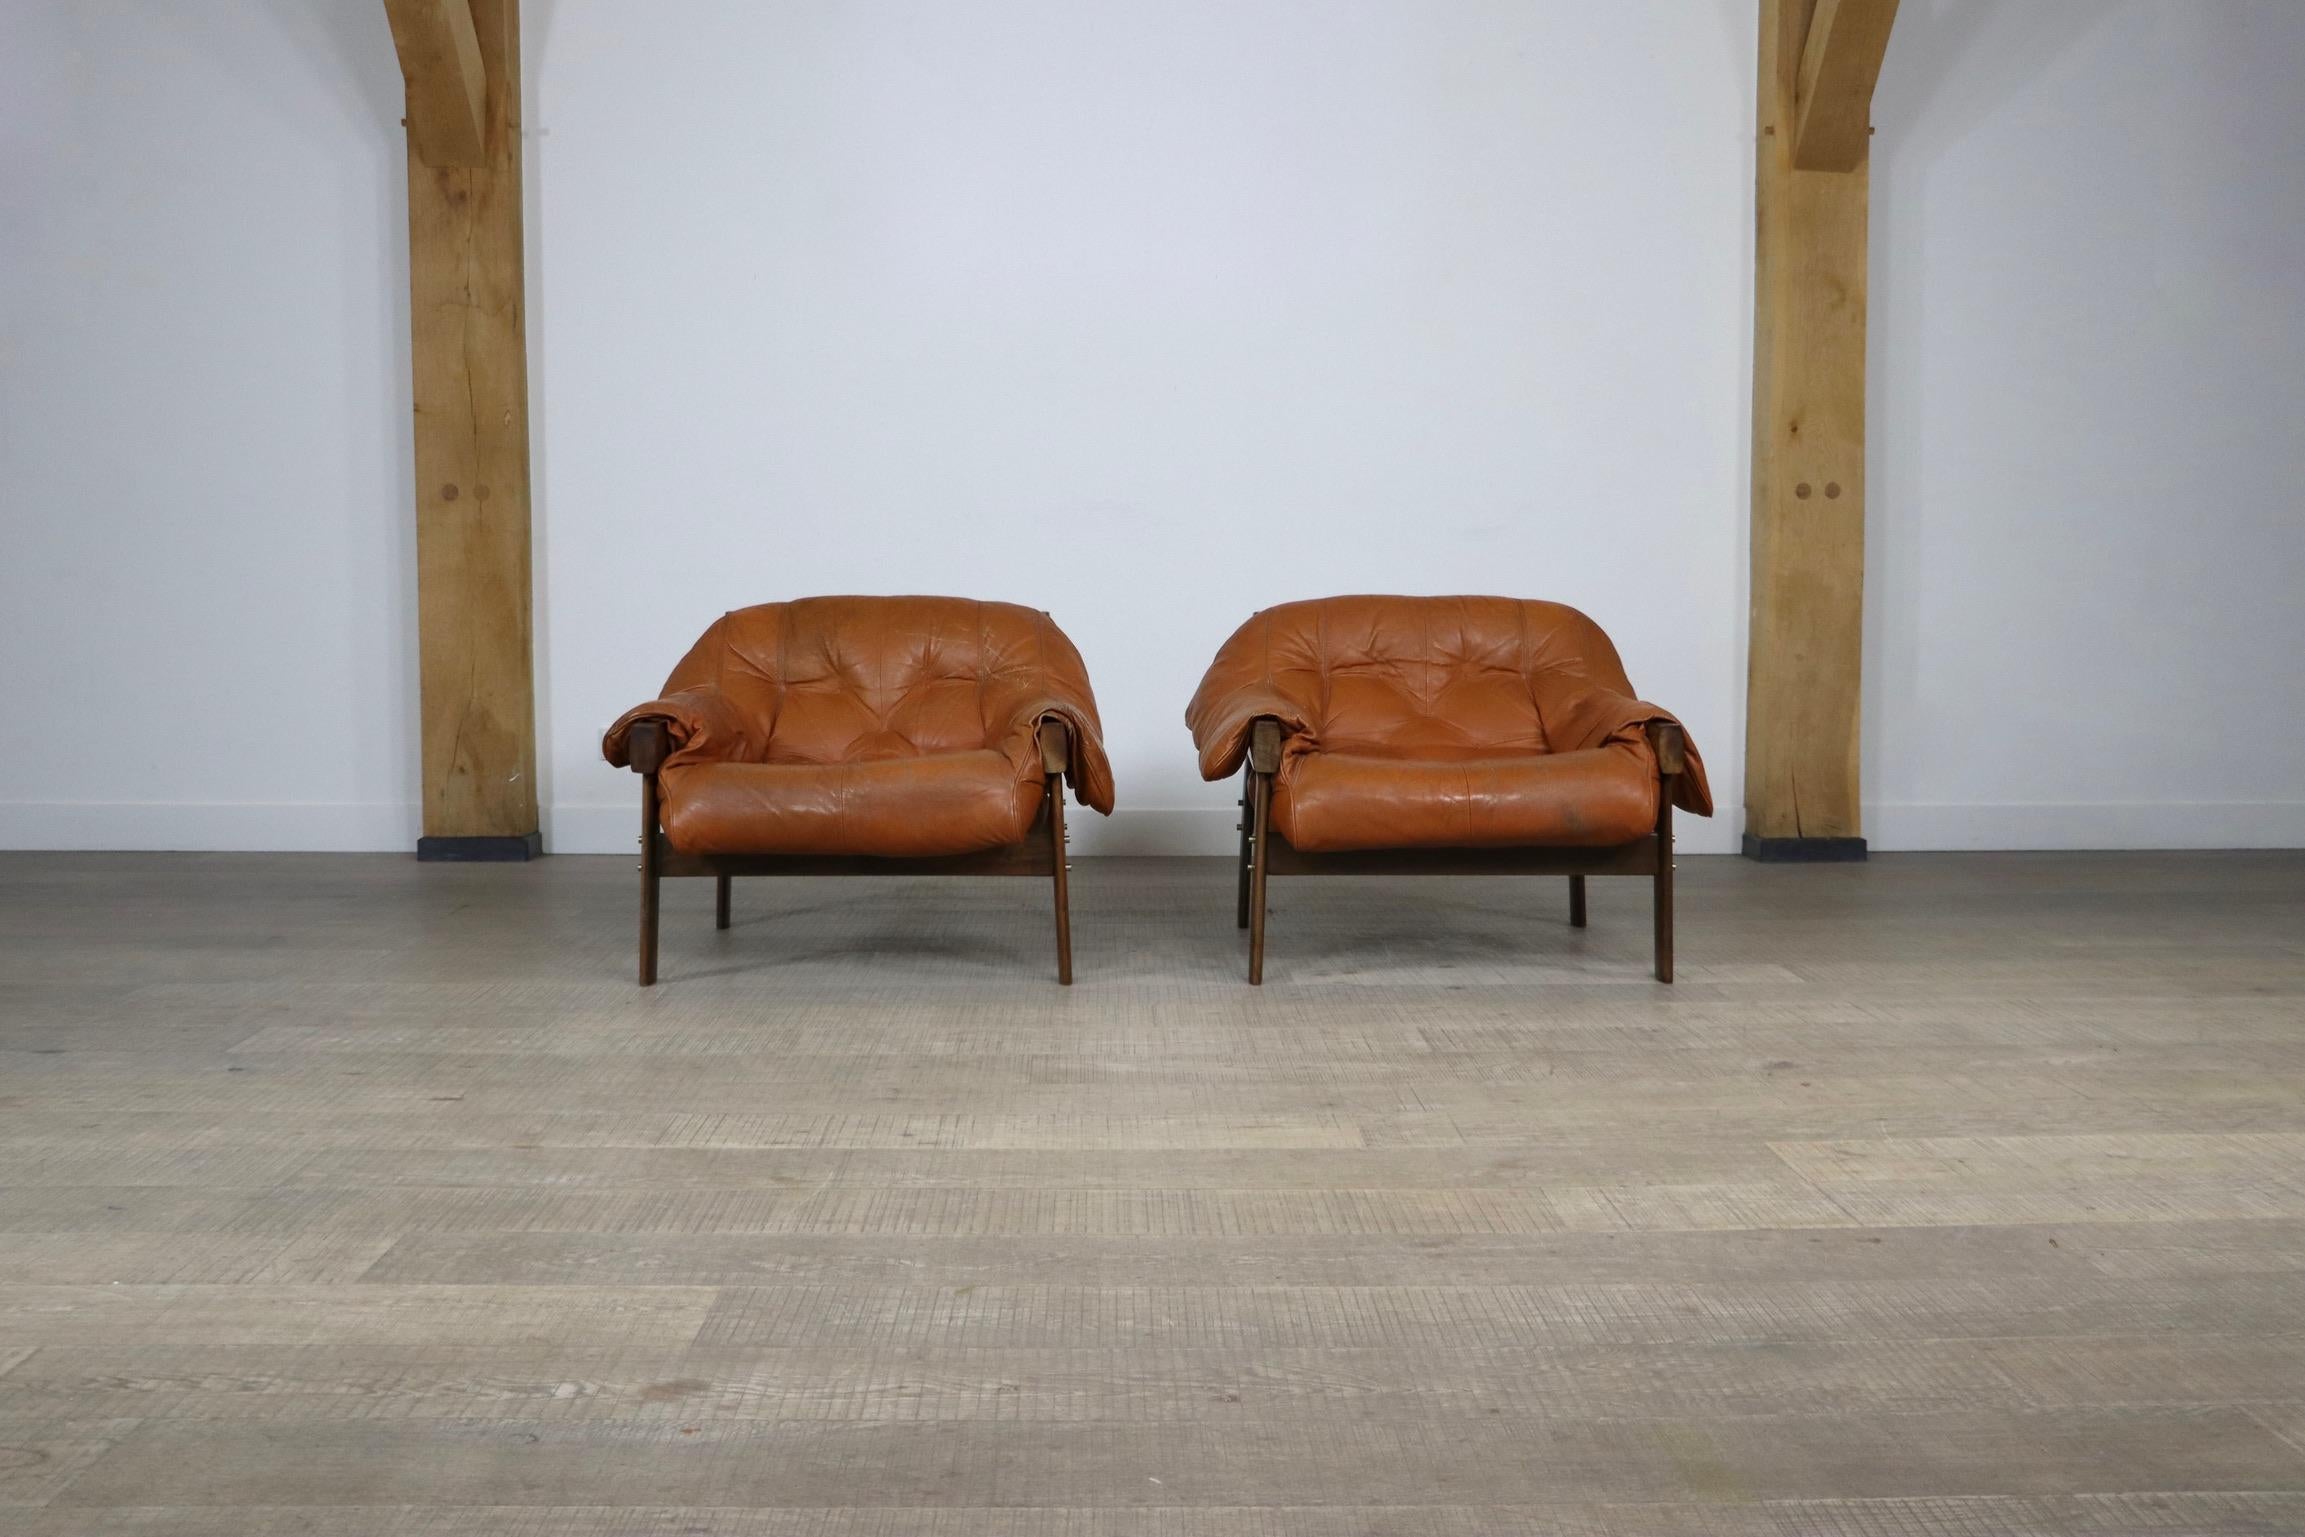 Beautiful pair of MP-41 lounge chairs in original cognac leather and jacaranda wood frame, designed by Percival Lafer for MP Lafer, 1970s. Both chairs have original mark in the leather strap on the back. 
This highly comfortable and great looking